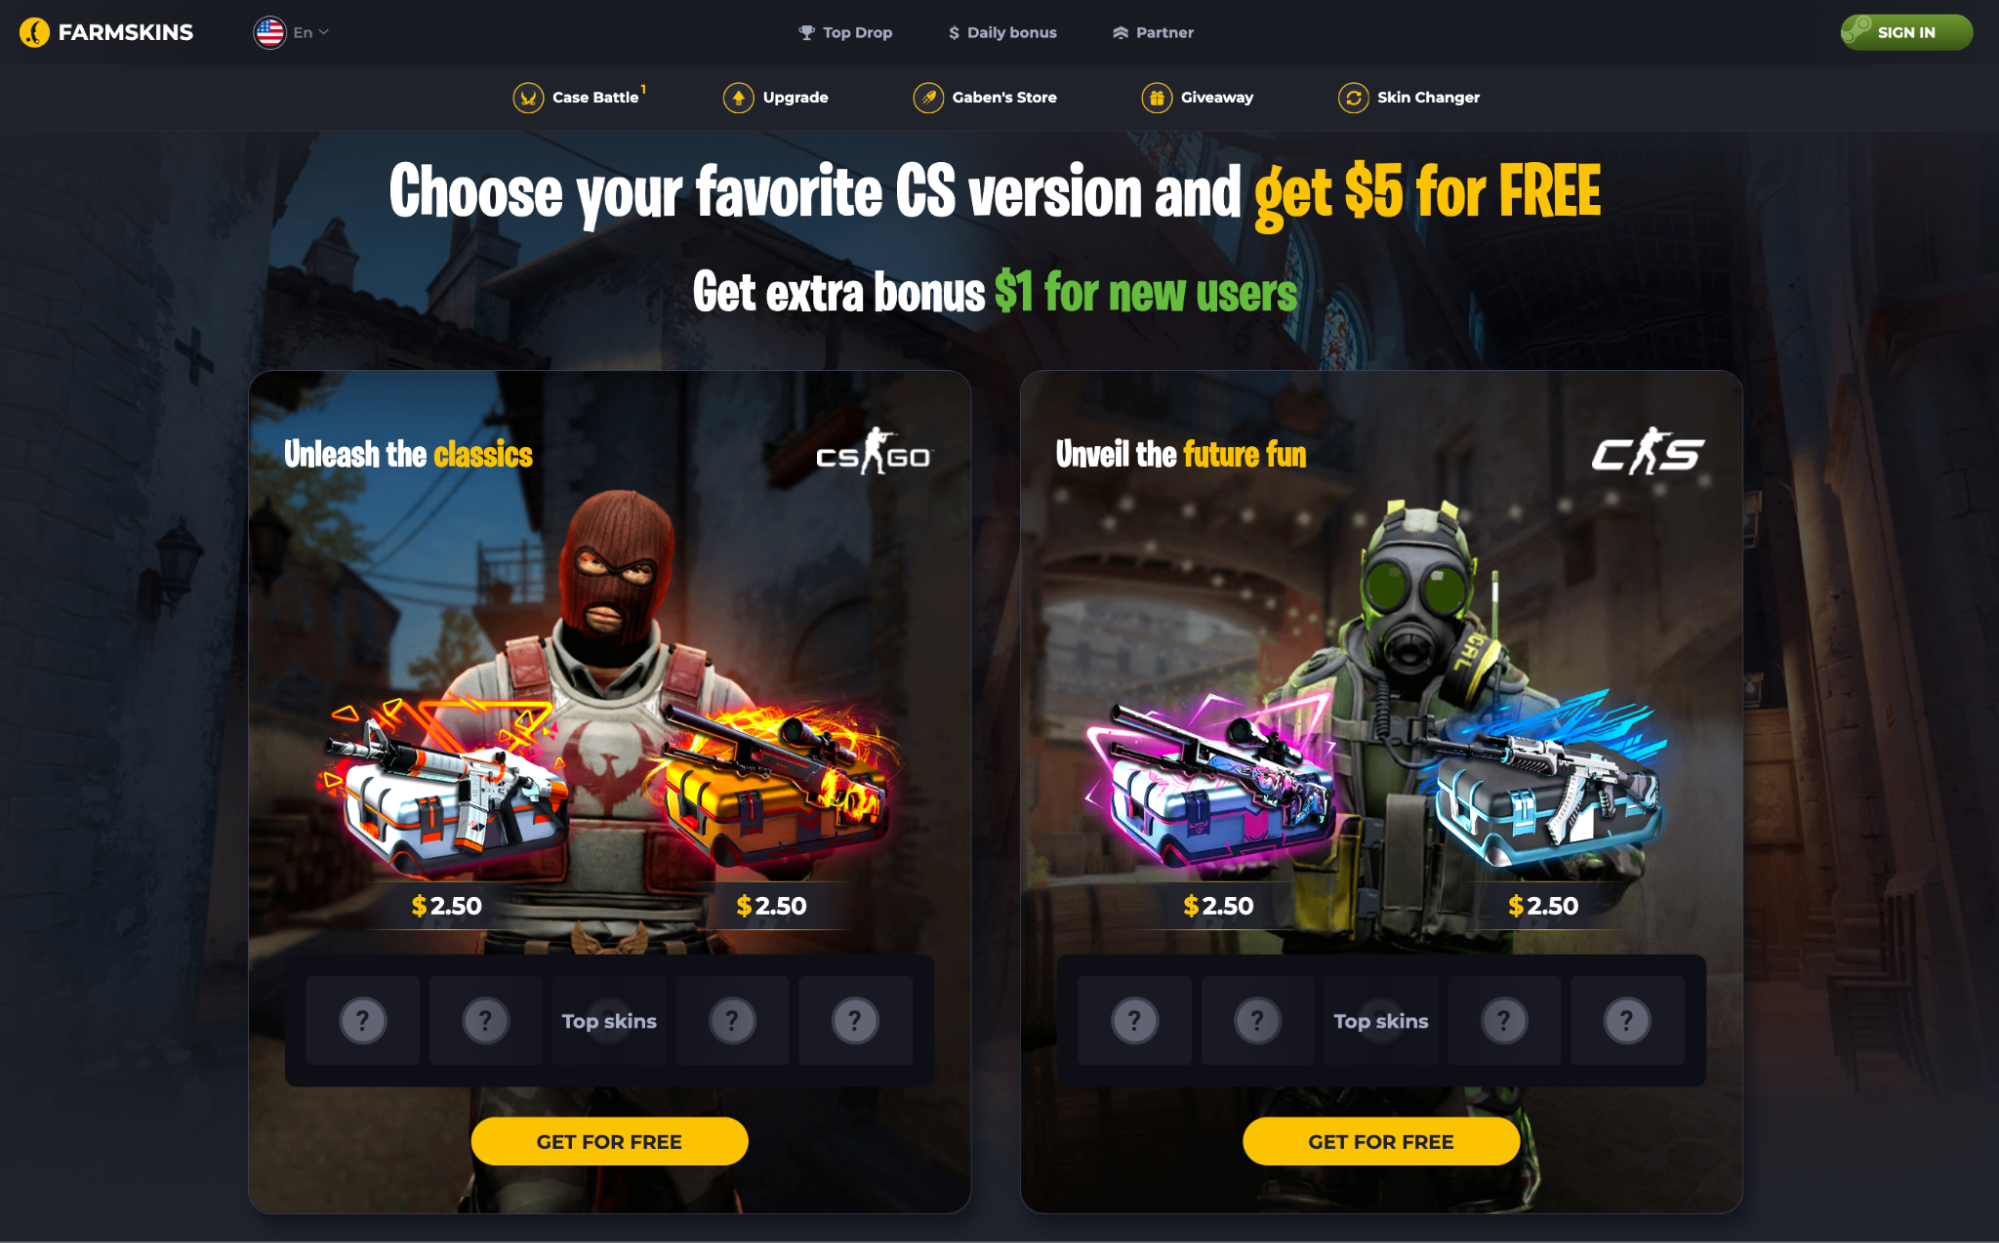 FarmSkins Promo Code for April 2024: Get Free Cases and Bonuses | CS2 Cases